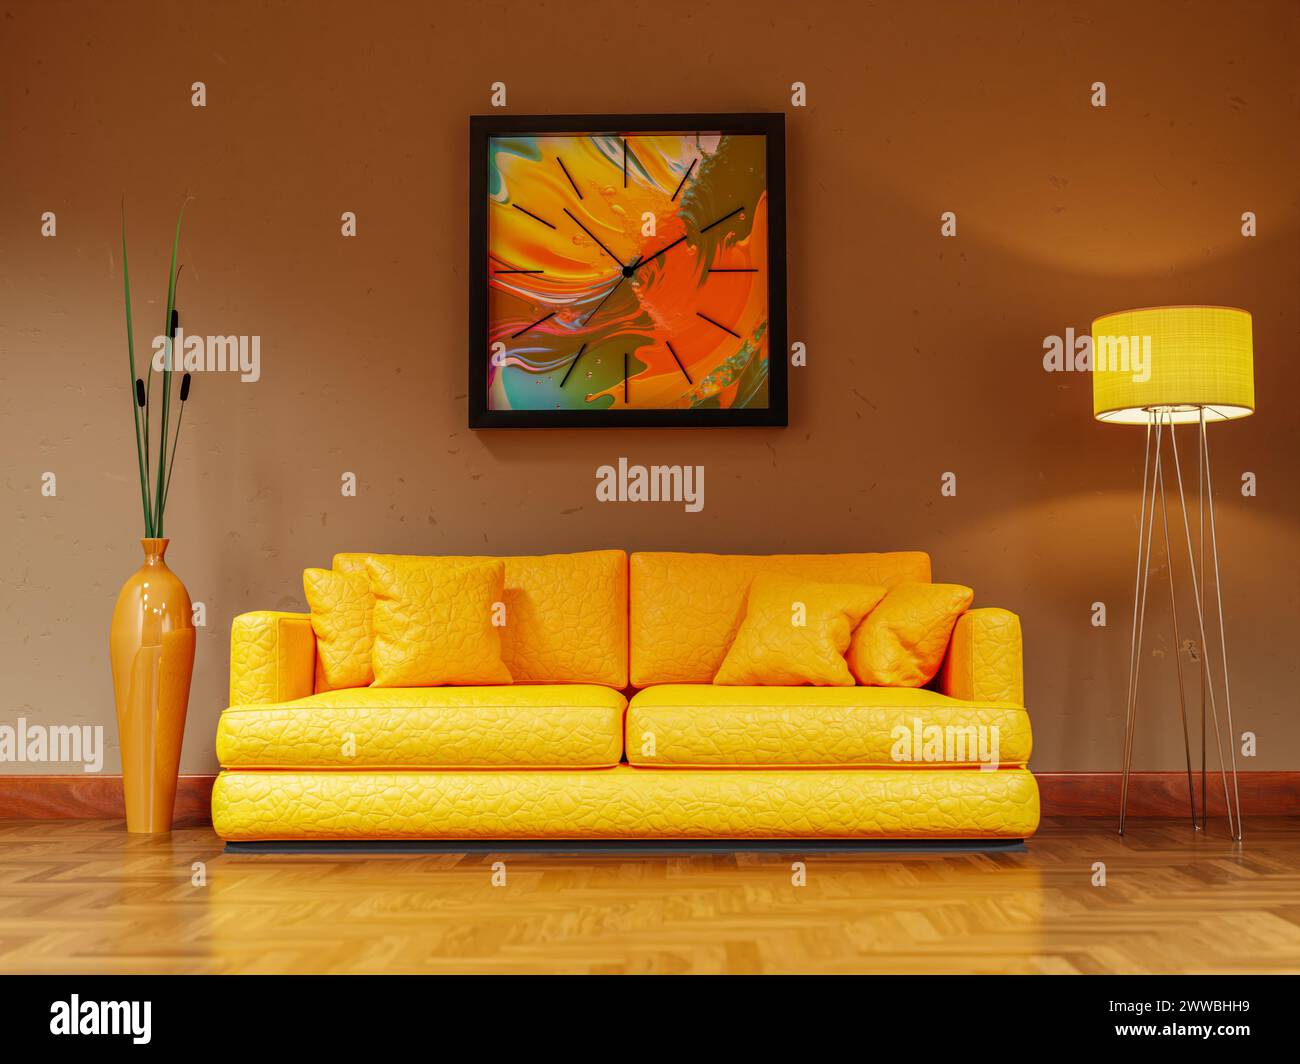 3D rendering of architectural visualization of modern living room with yellow leather sofa, wall clock, floor lamp and potted plant Stock Photo